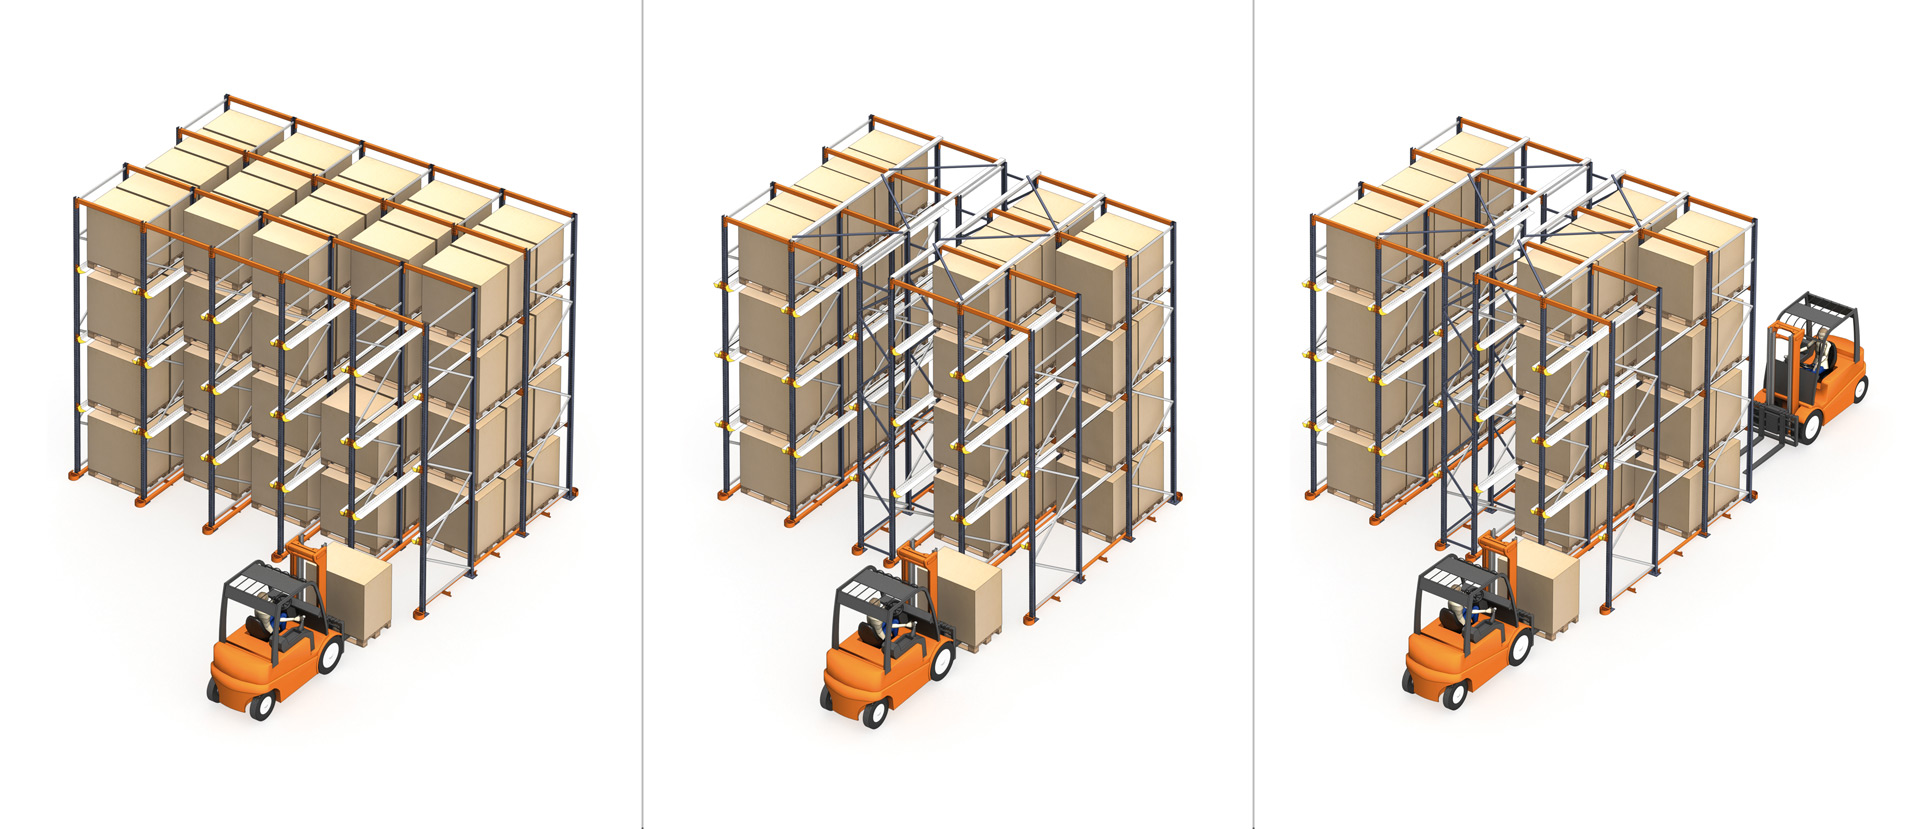 Drive-in racking can alternatively be drive-through, depending on whether the load will be accessed from one or both sides